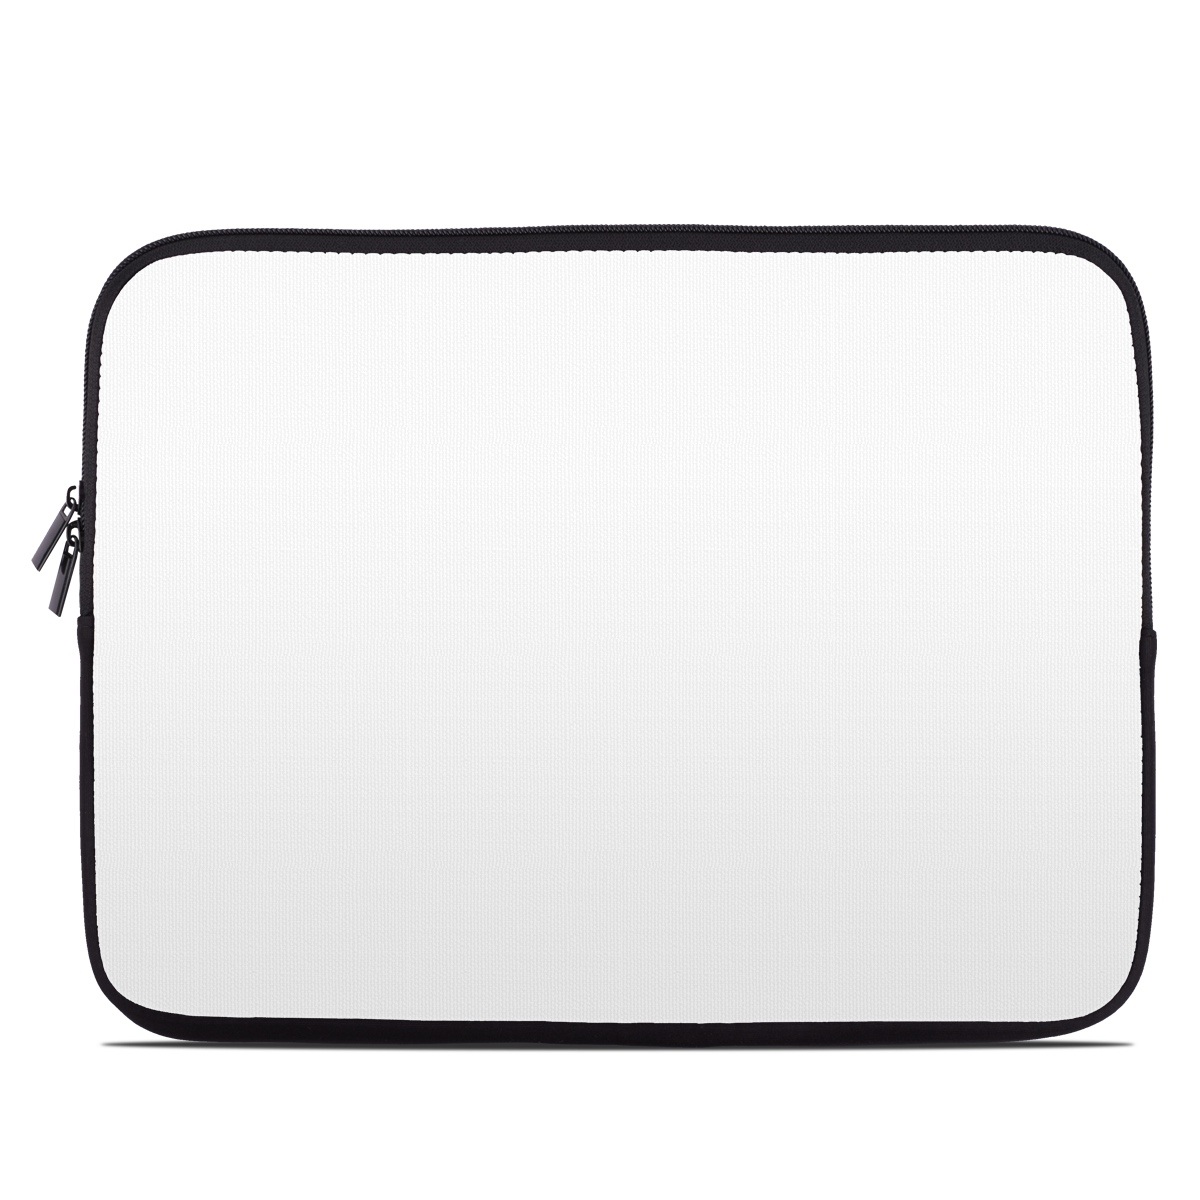 Laptop Sleeve - Solid State White (Image 1)